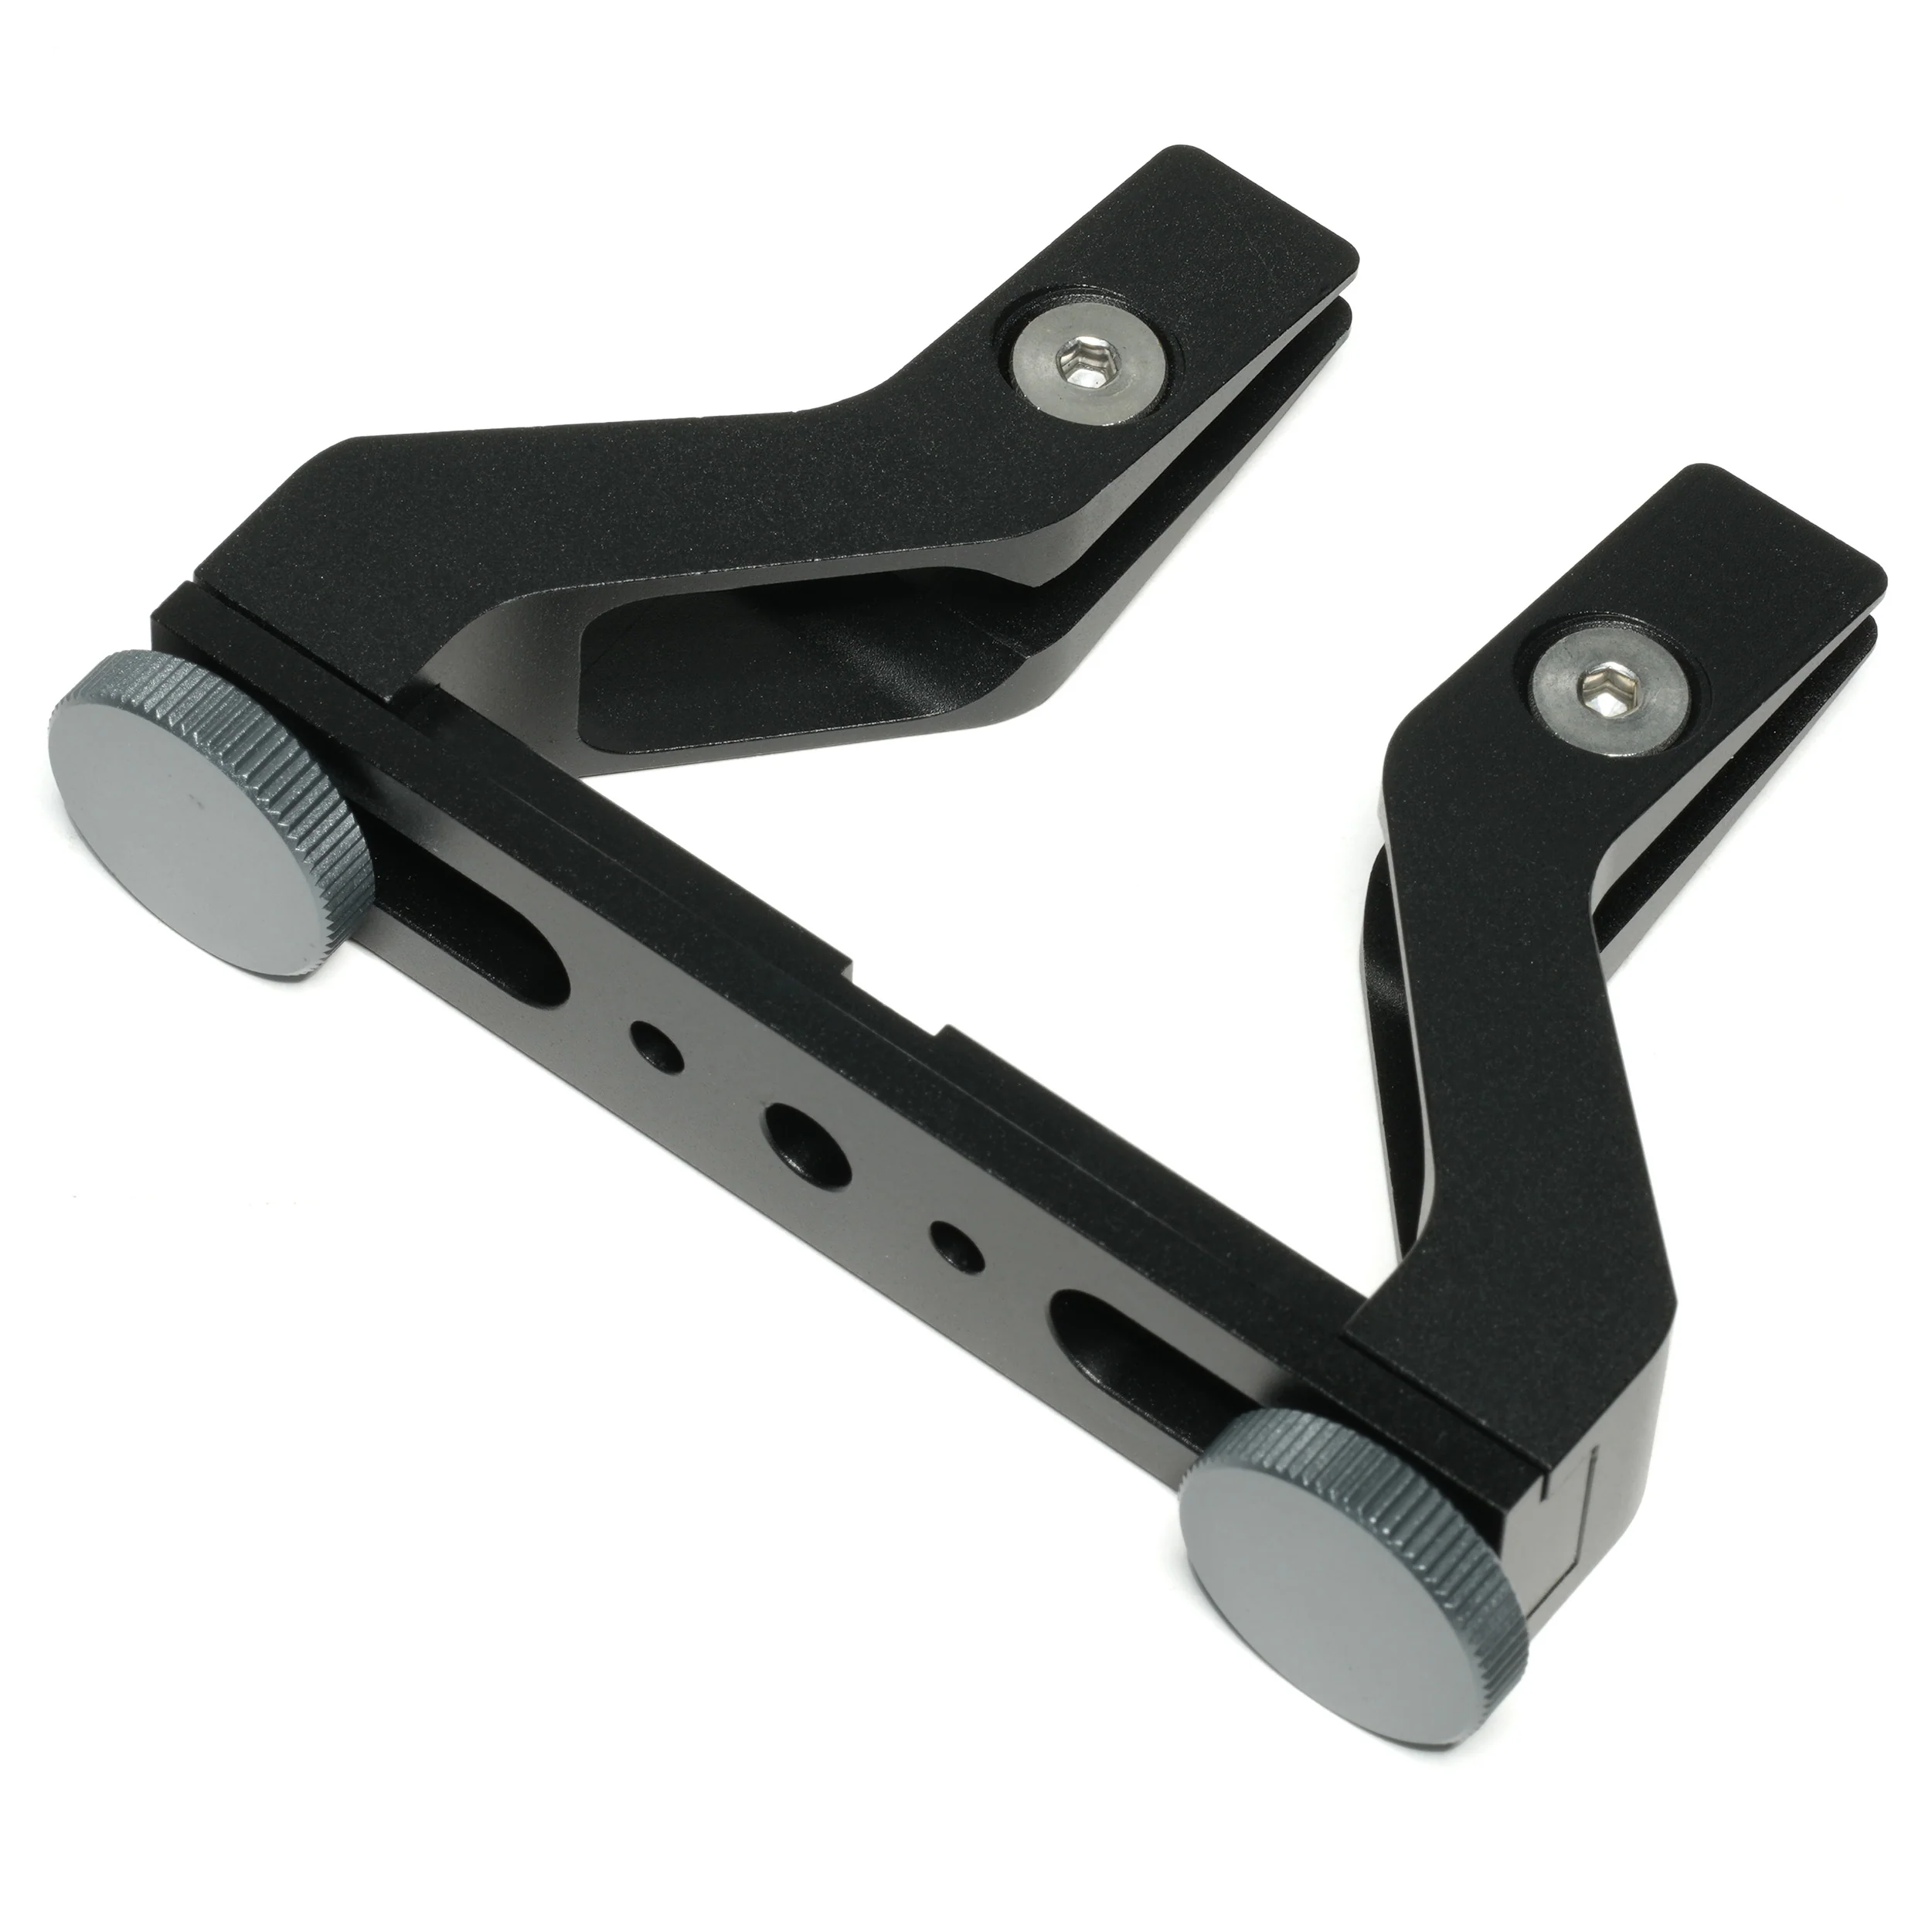 Planeshift Clamps Upgrade for WSPA Questions & Answers